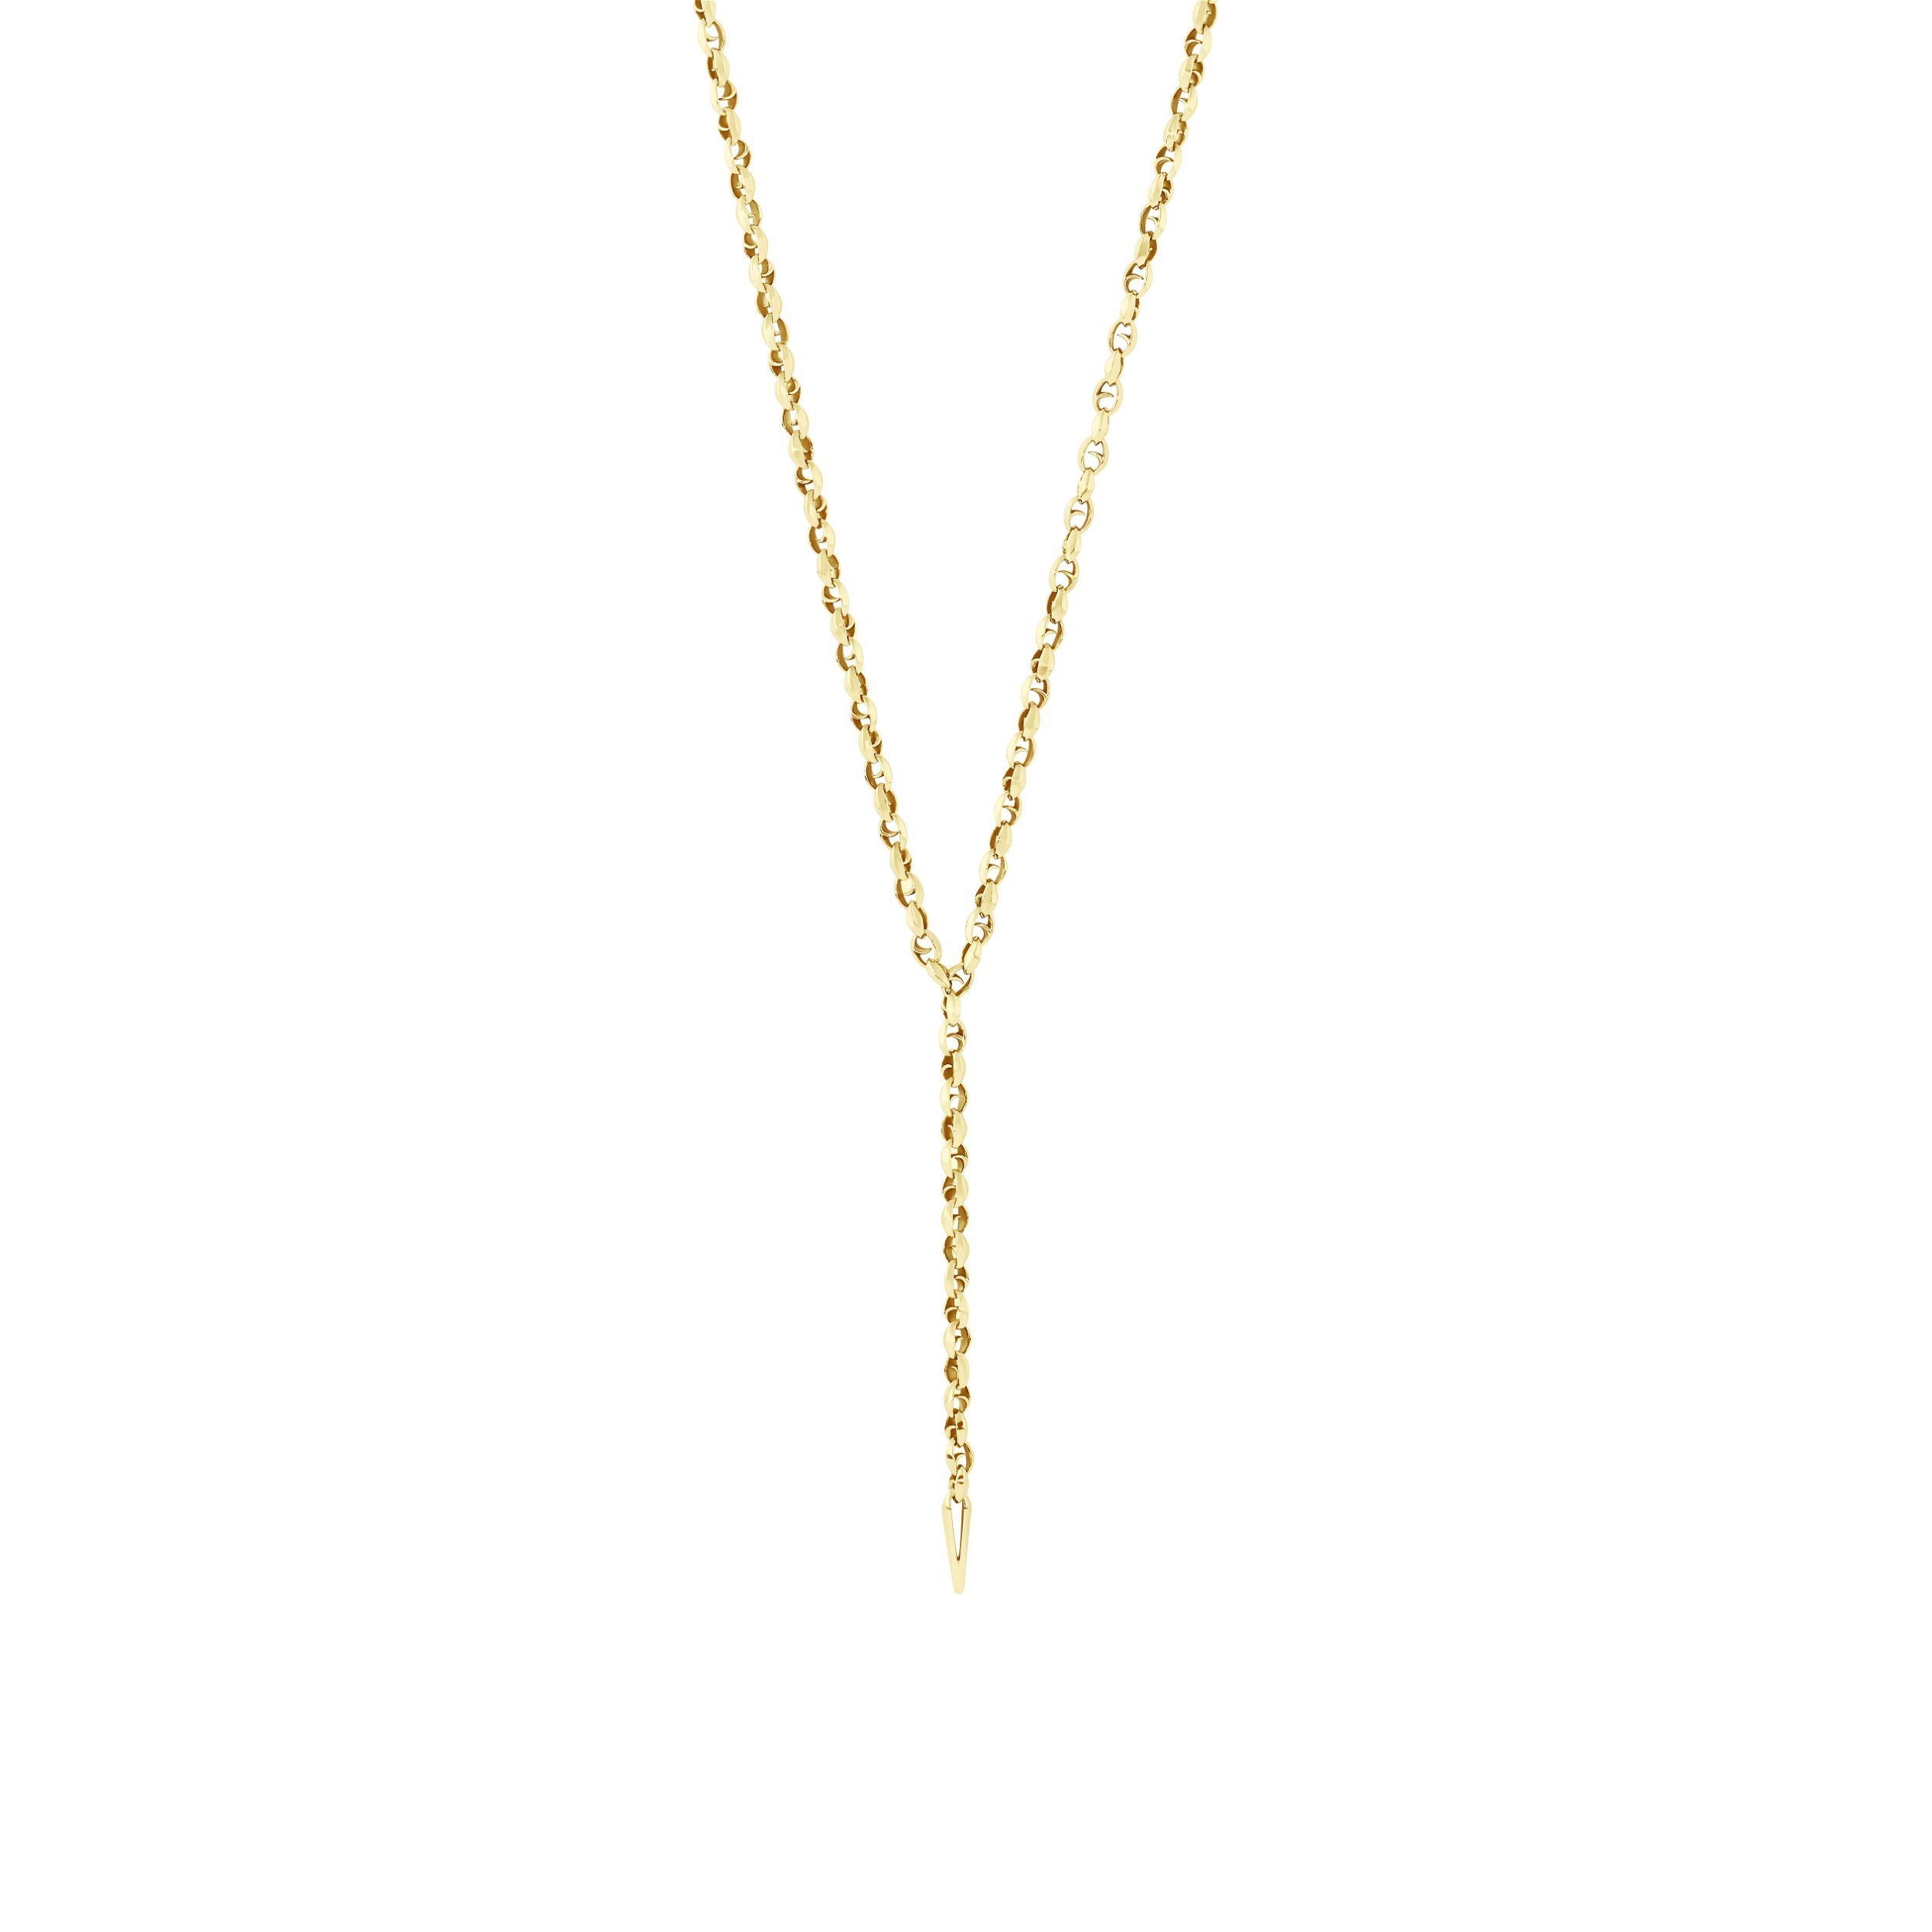 Thorn Lariat Necklace in 18kt Yellow Gold